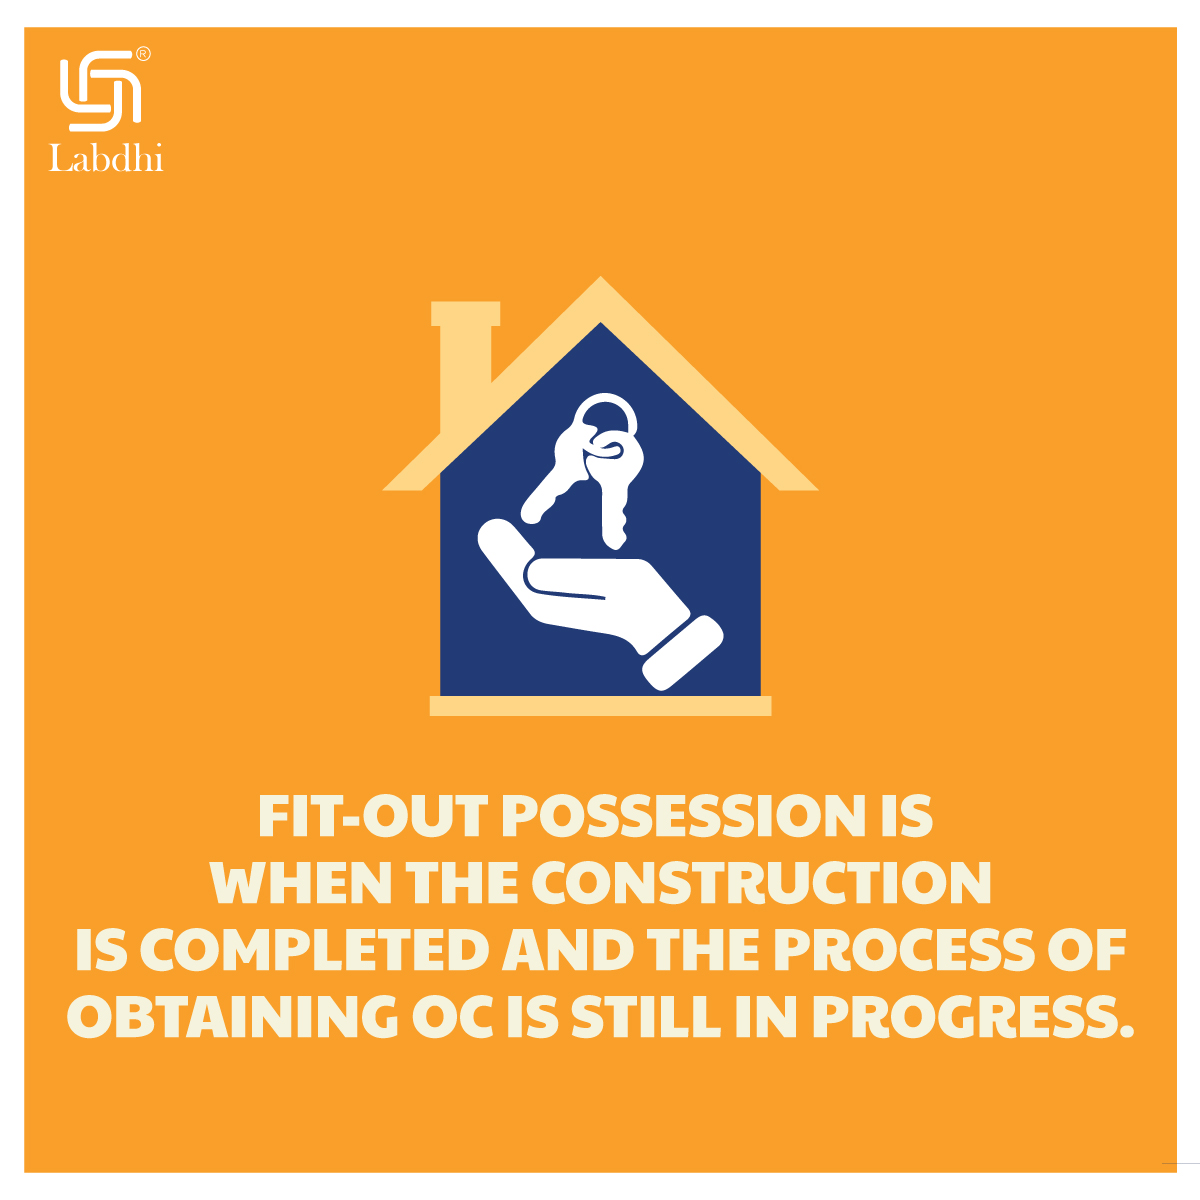 Now you know why getting Fit-Out Possession on time is important! ✅

#HouseHunting #GruhPravesh #FitOutPossession #InteriorDesign #Construction #OC #NewProperty #PropertyListing #MumbaiRealEstate #RealEstate #LabdhiLifestyle